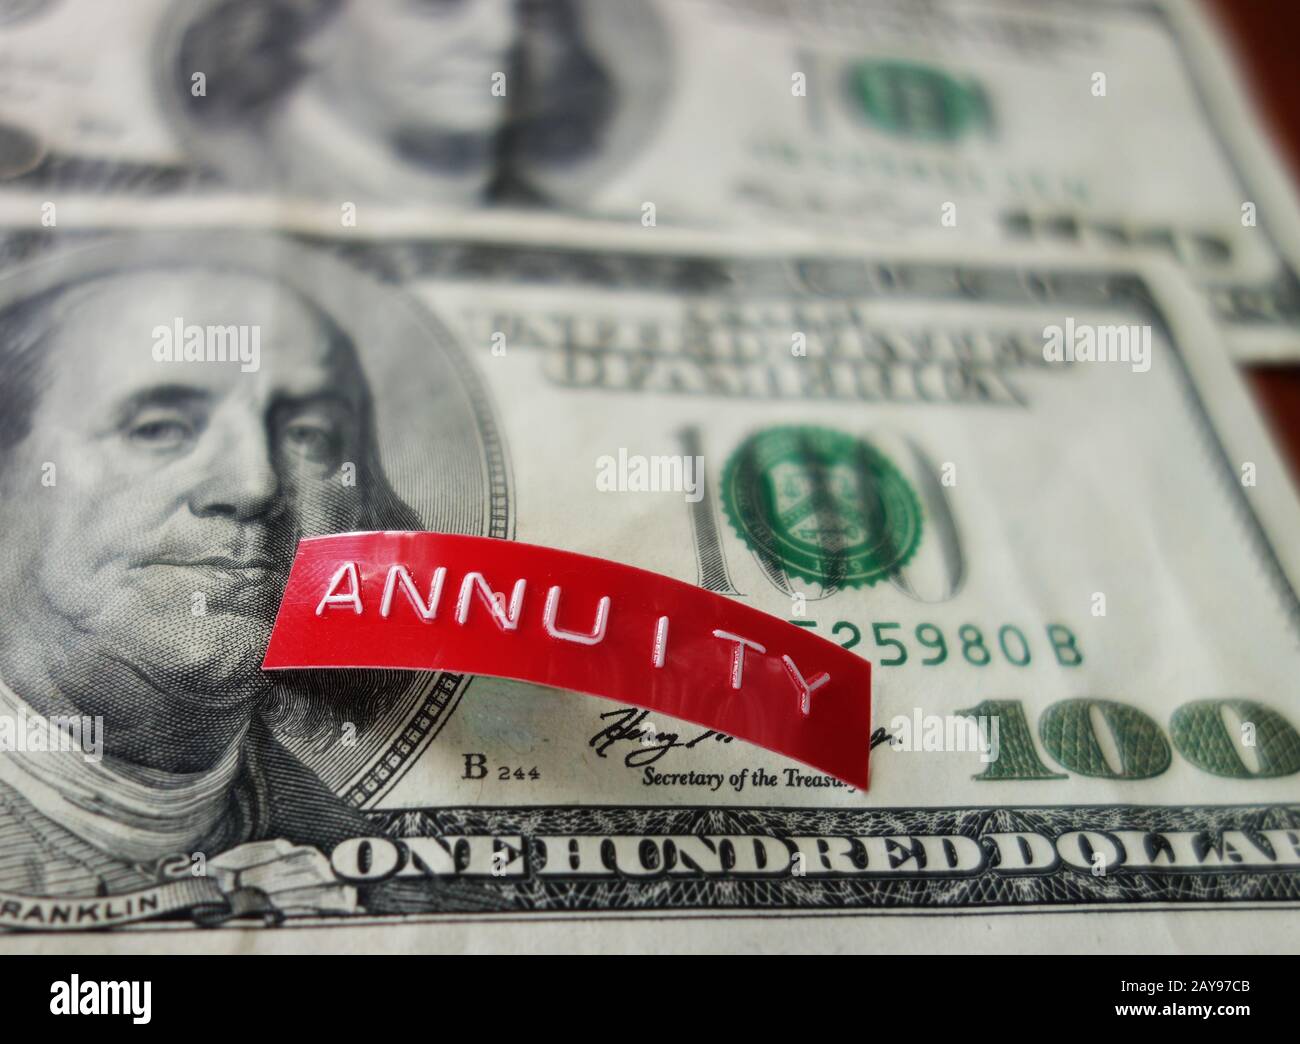 Annuity investing concept Stock Photo